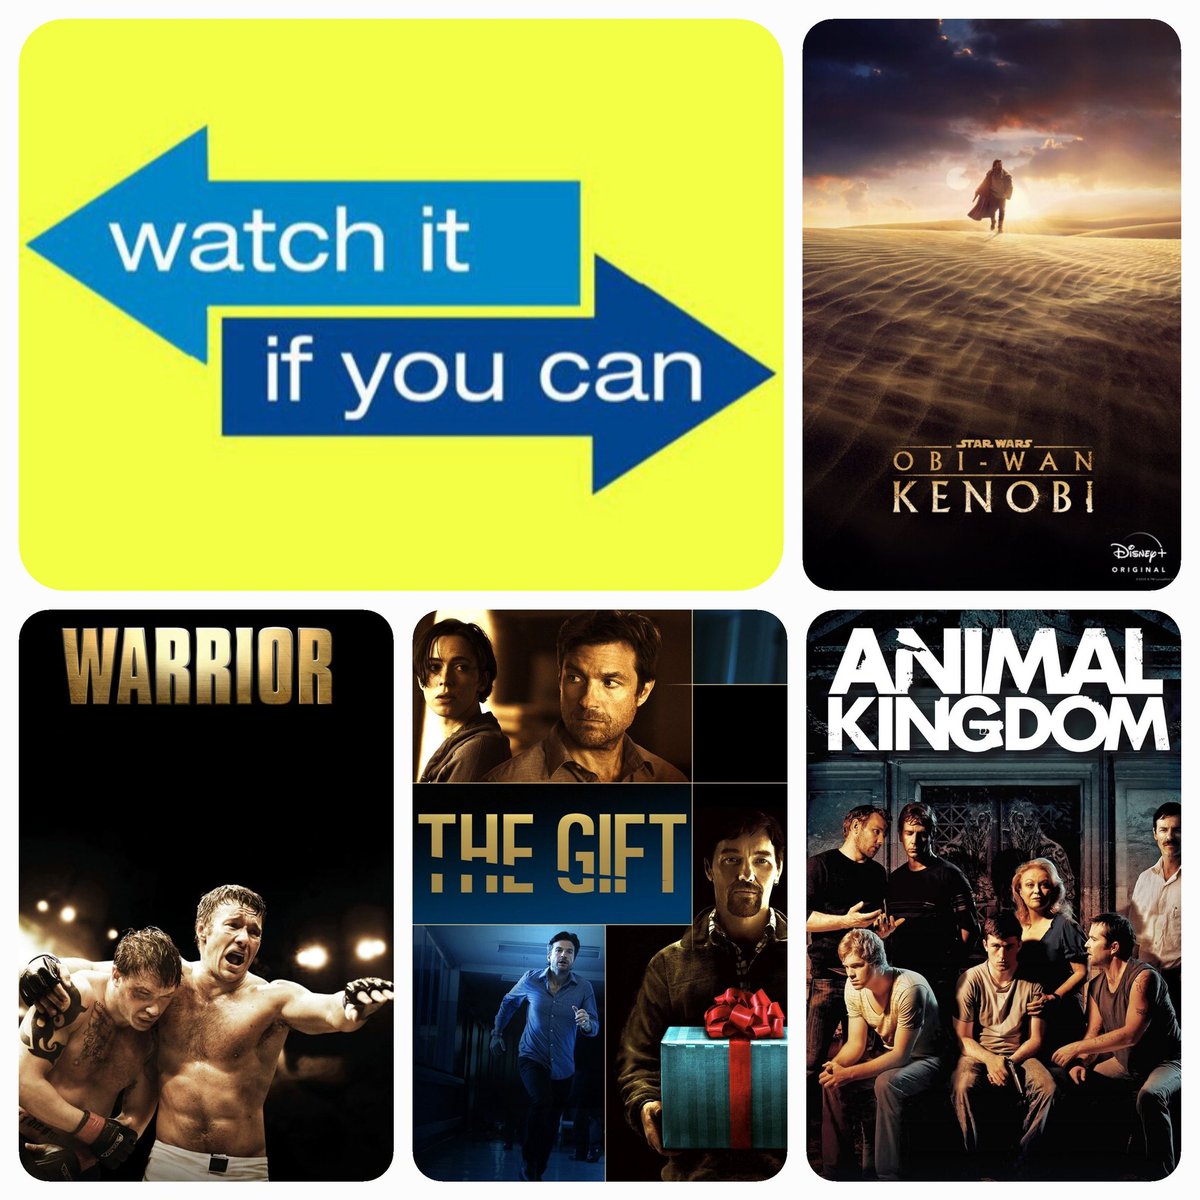 Some of our favourite movies/tv shows featuring Joel Edgerton. 

Any you haven't seen? Then maybe...
just maybe #watchitifyoucan